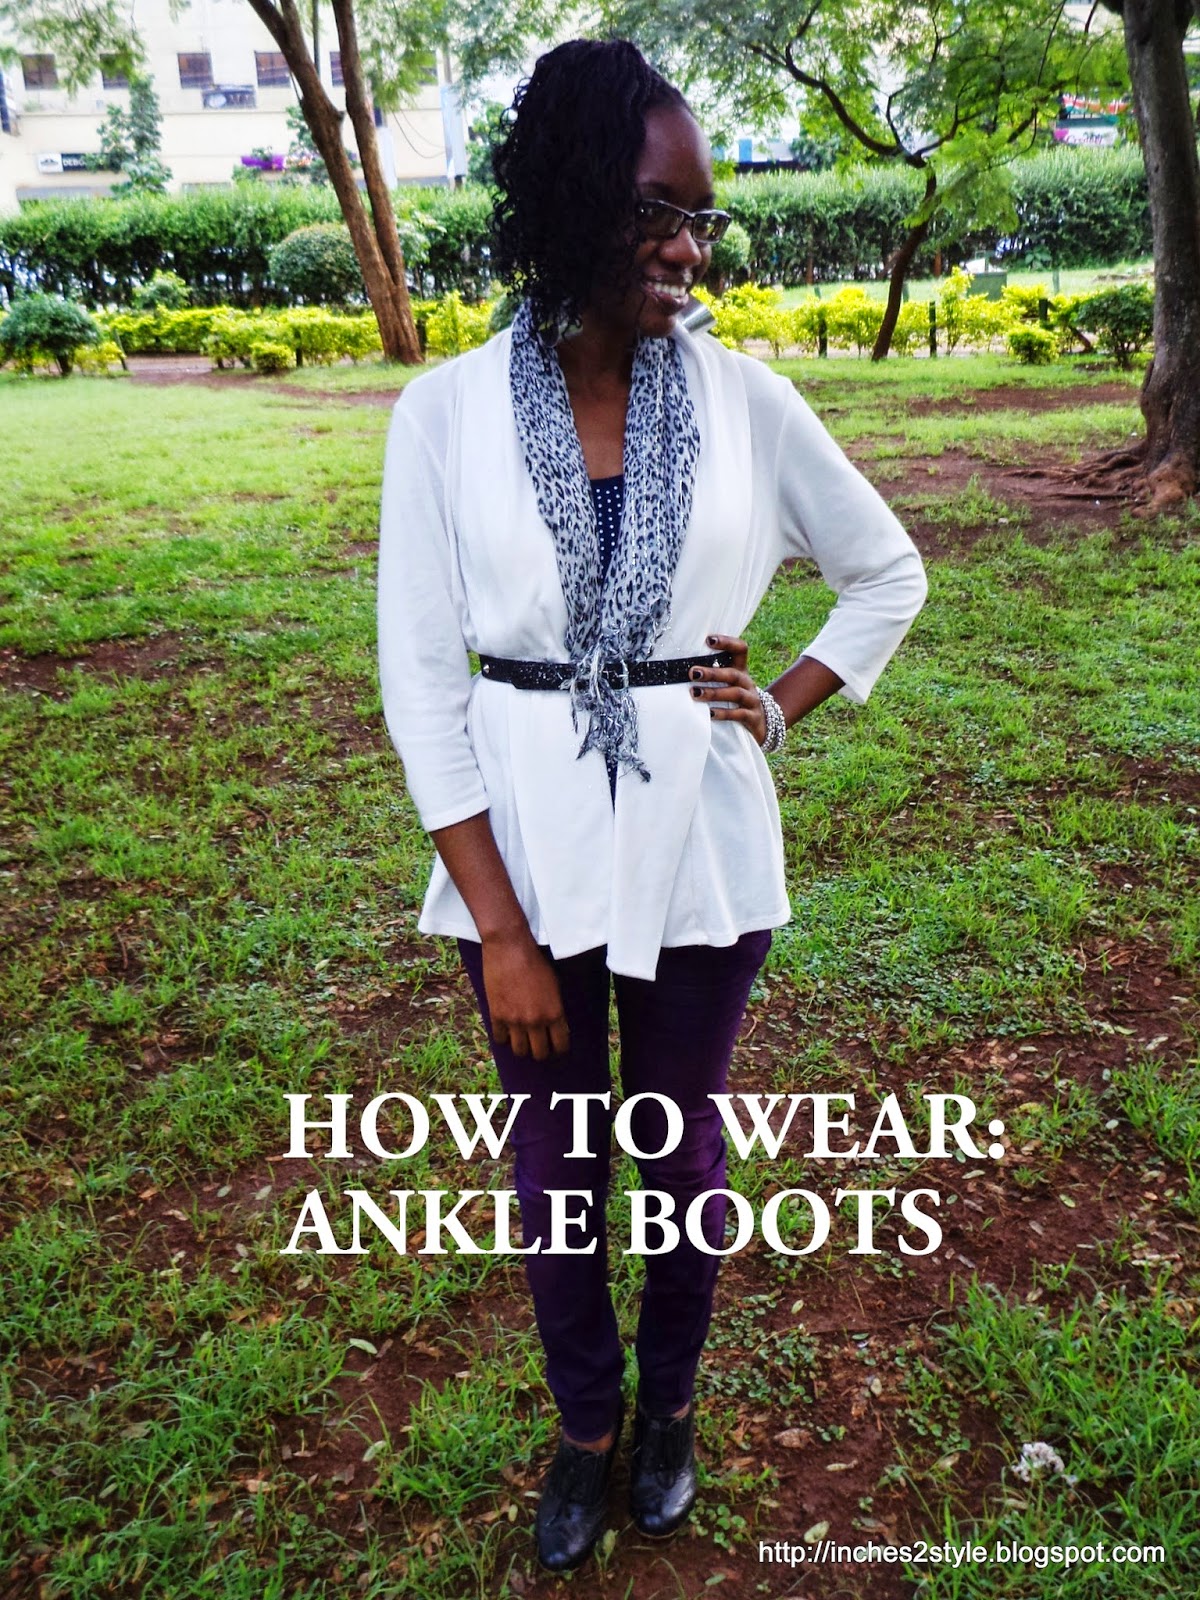 HOW TO: WEAR ANKLE BOOTS